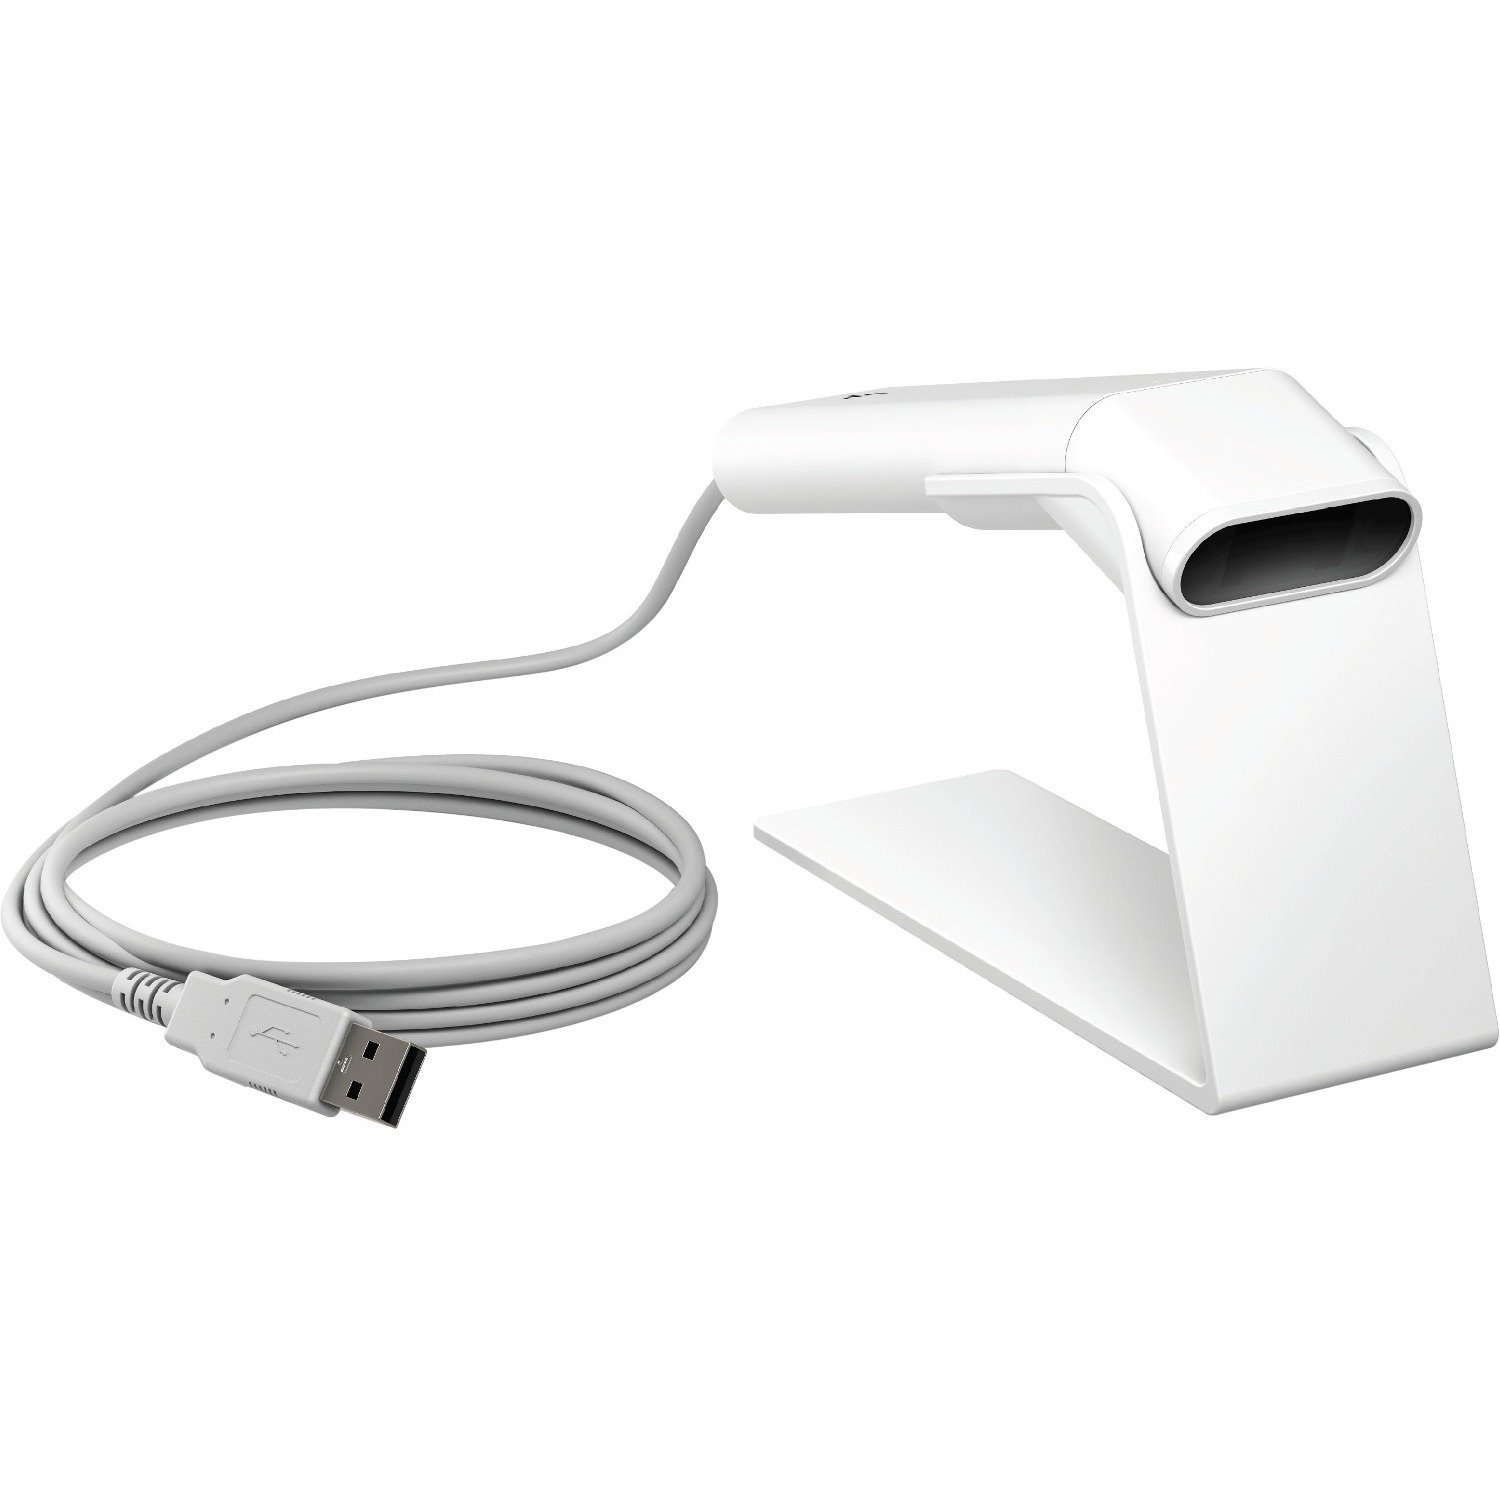 HP ElitePOS Handheld Barcode Scanner - Cable Connectivity - Ceramic White